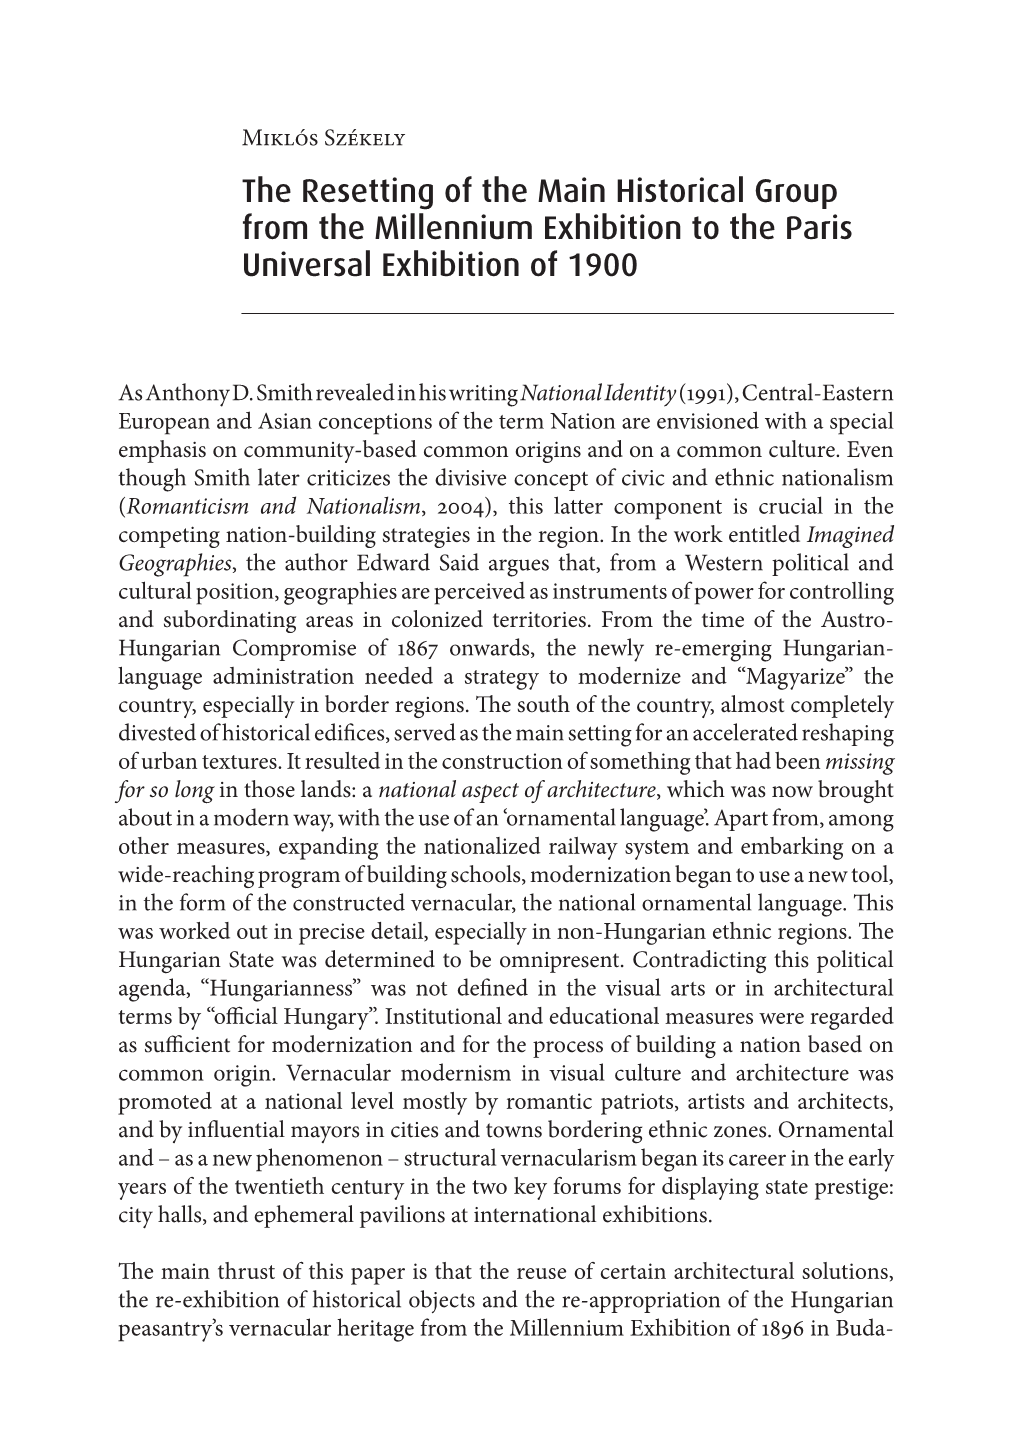 The Resetting of the Main Historical Group from the Millennium Exhibition to the Paris Universal Exhibition of 1900